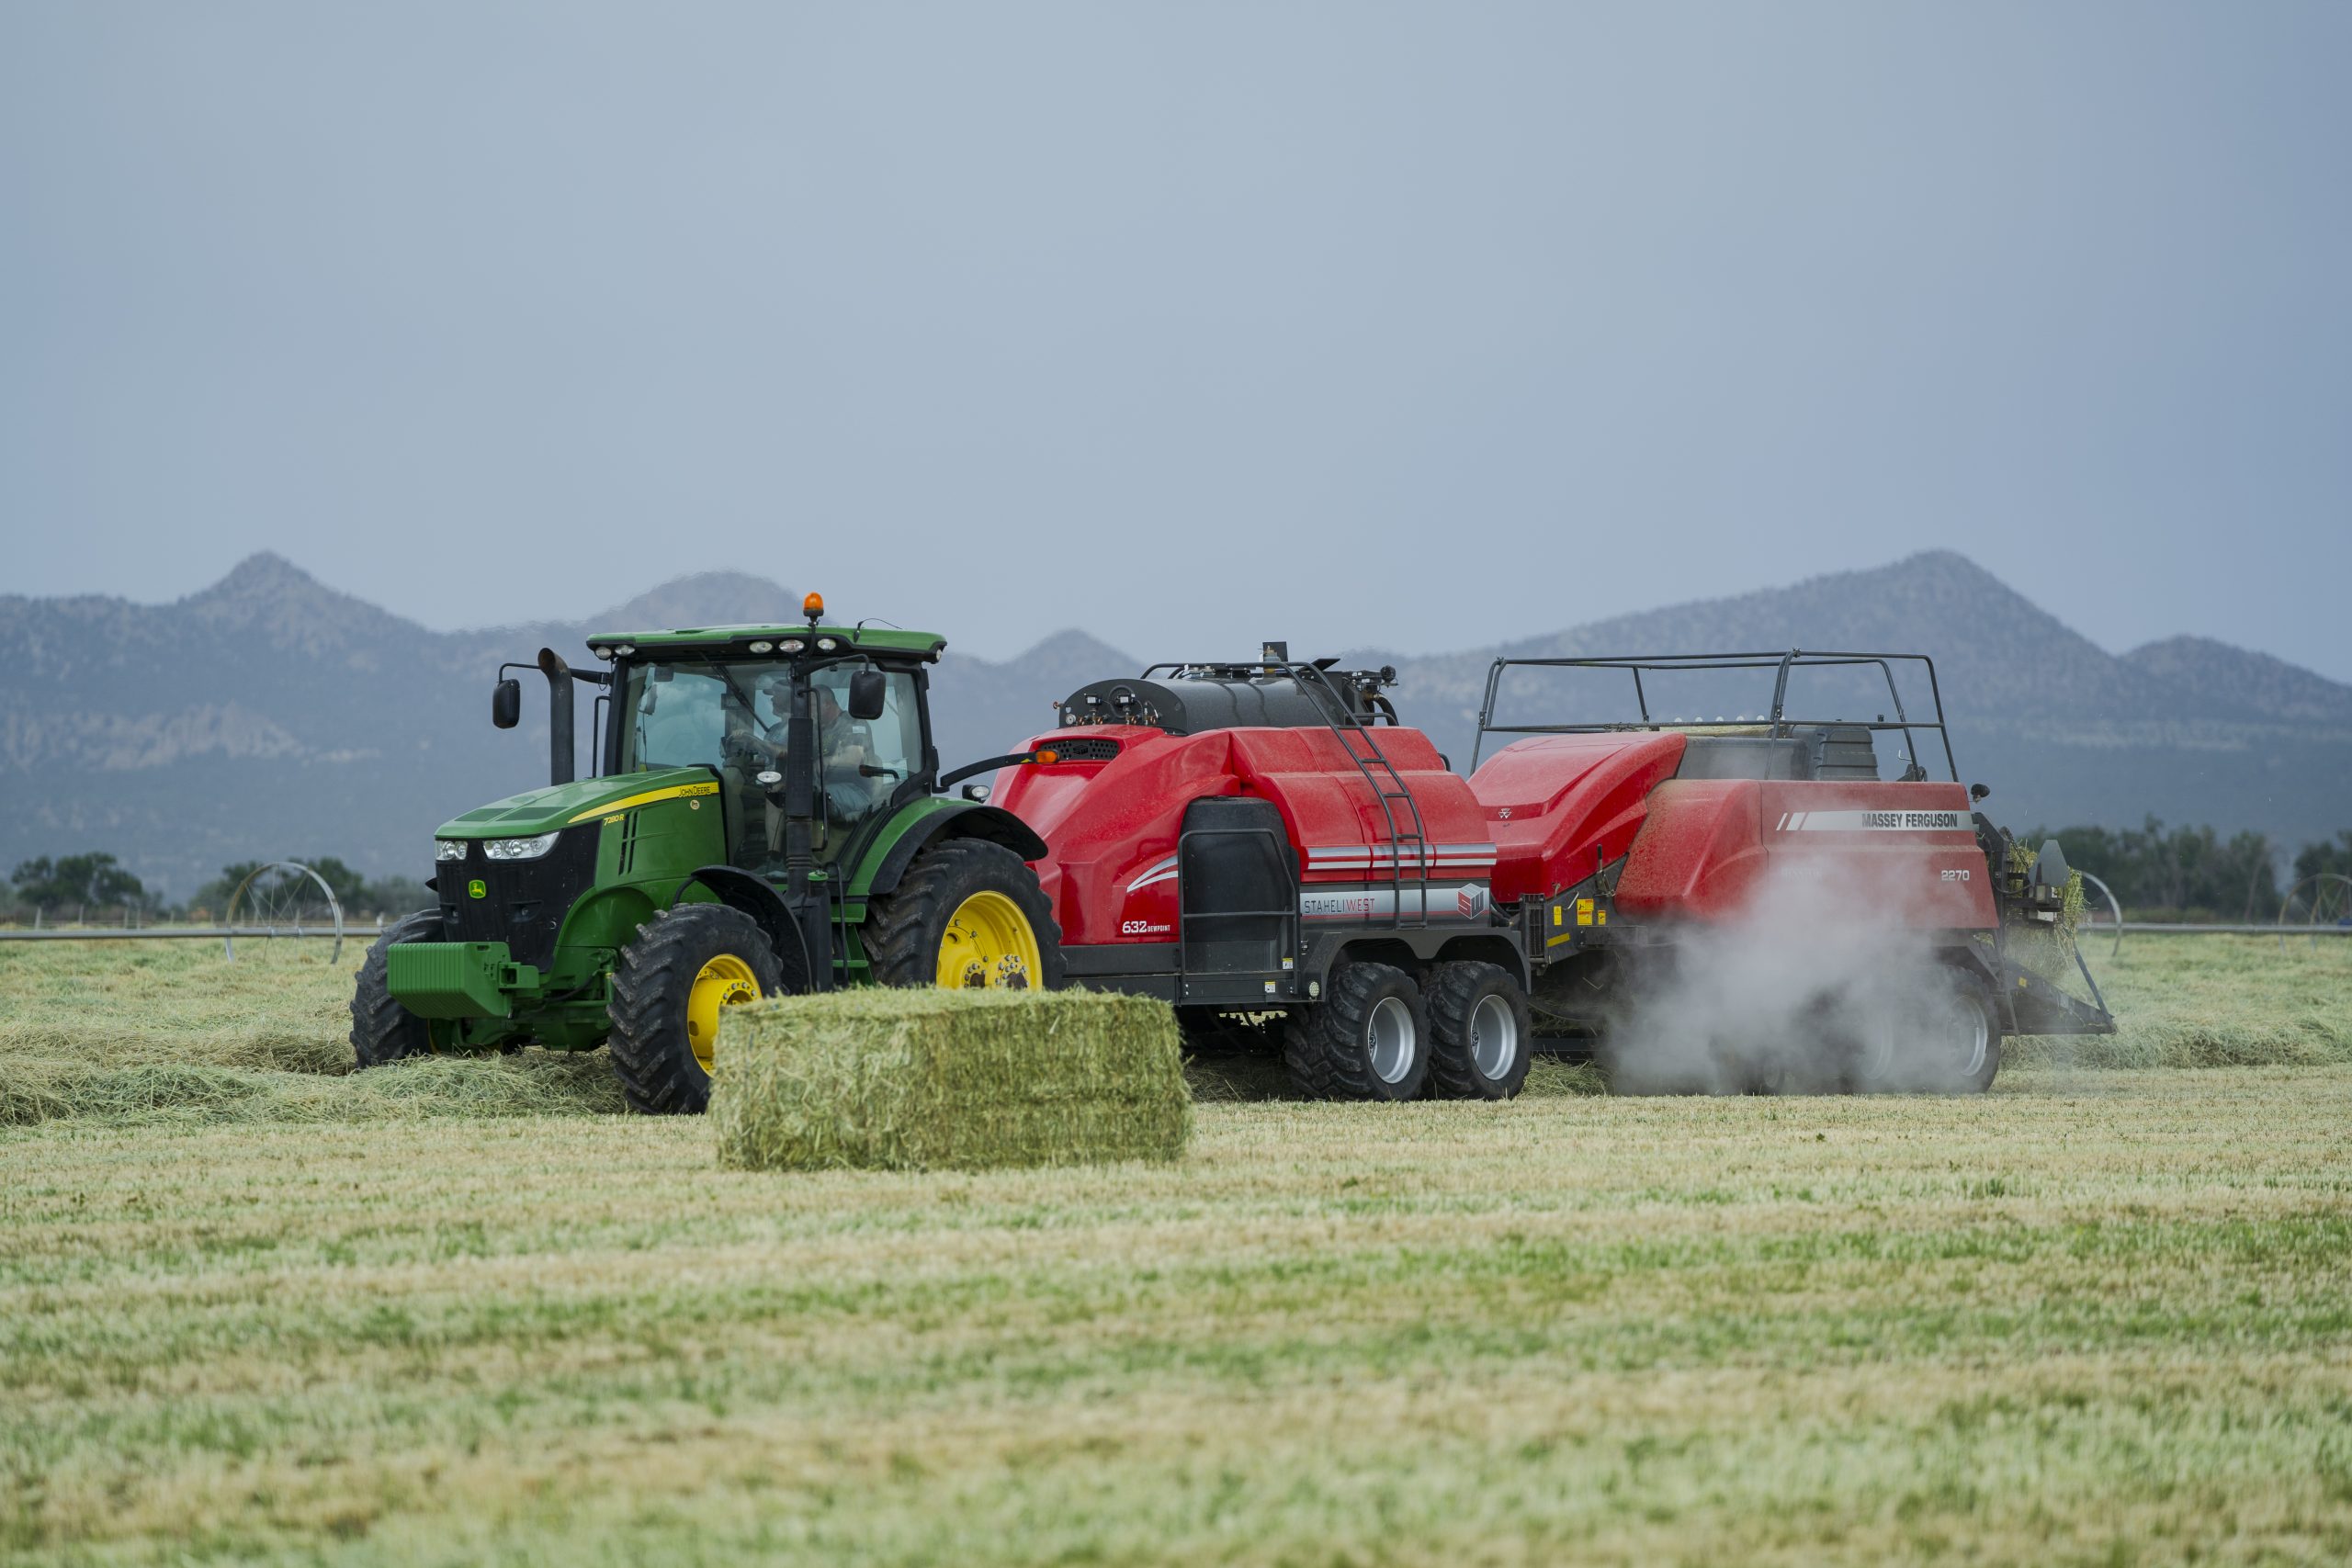 Featured image for “Baling Perfect Hay: The DewPoint Machines Are Designed to Make High-Quality Steam”